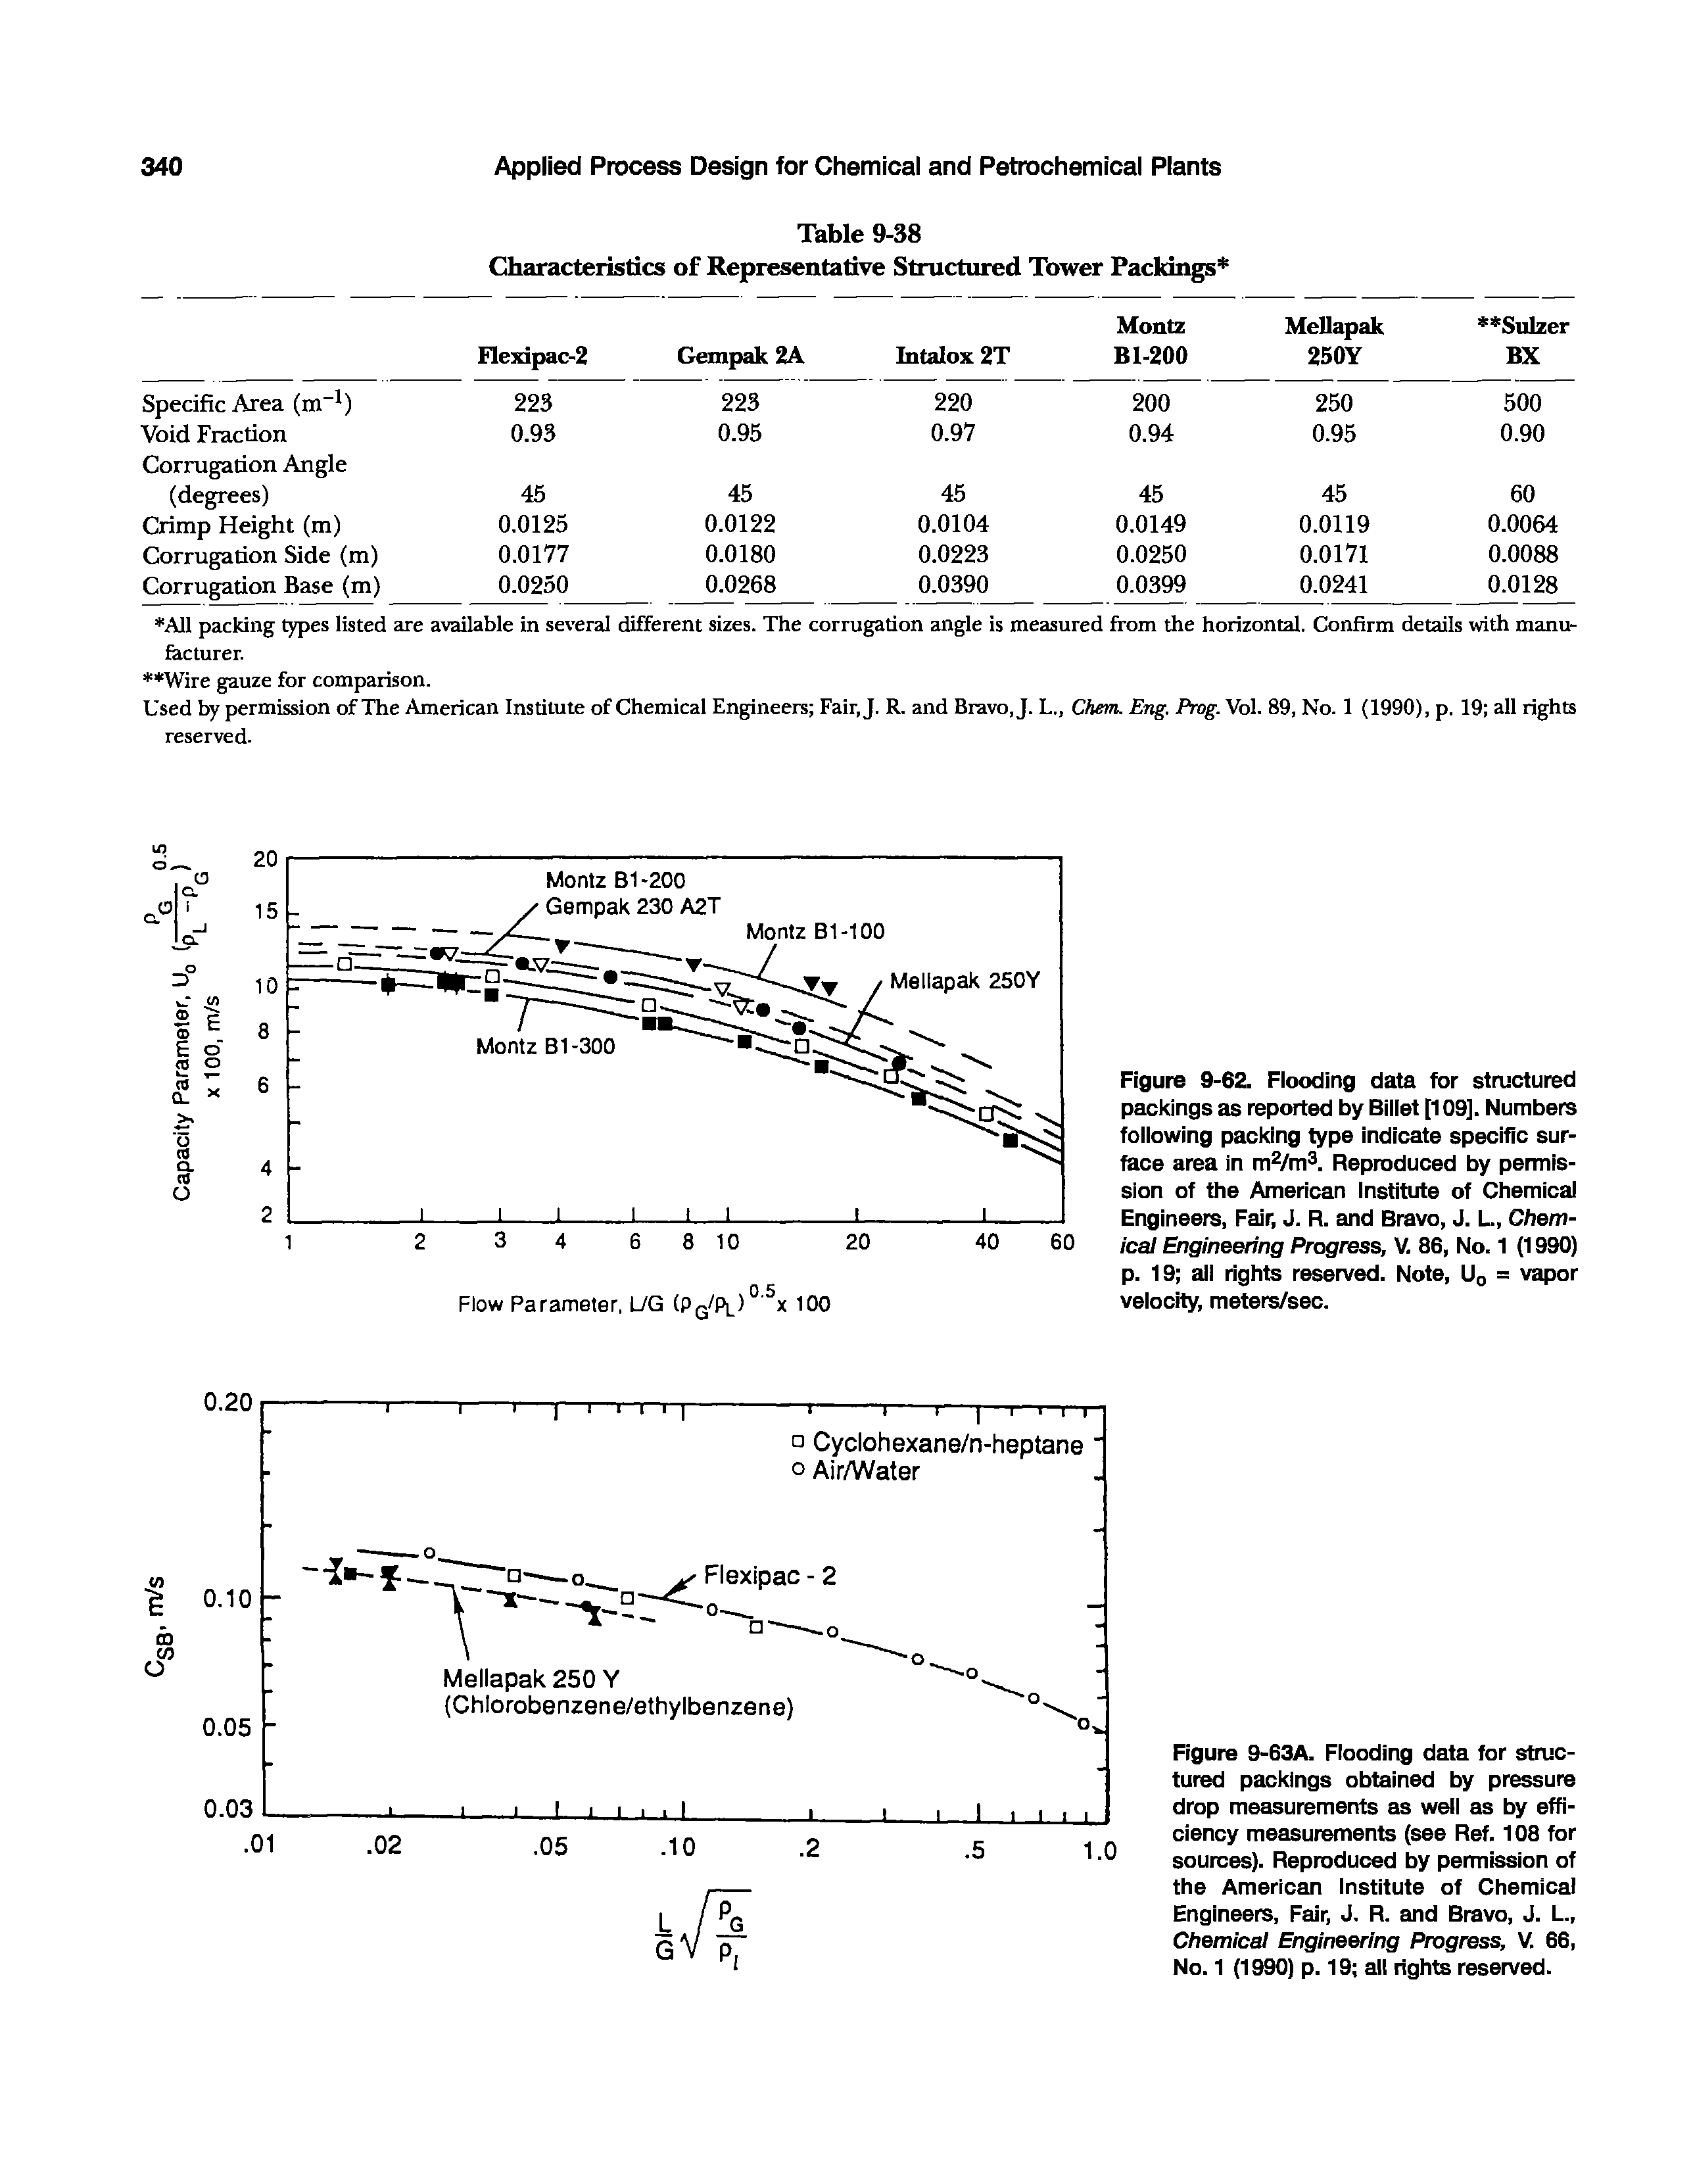 Figure 9-63A. Flooding data for structured packings obtained by pressure drop measurements as well as by efficiency measurements (see Ref. 108 for sources). Reproduced by permission of the American Institute of Chemical Engineers, Fair, J. R. and Bravo, J. L., Chemical Engineering Progress, V. 66, No. 1 (1990) p. 19 all rights reserved.